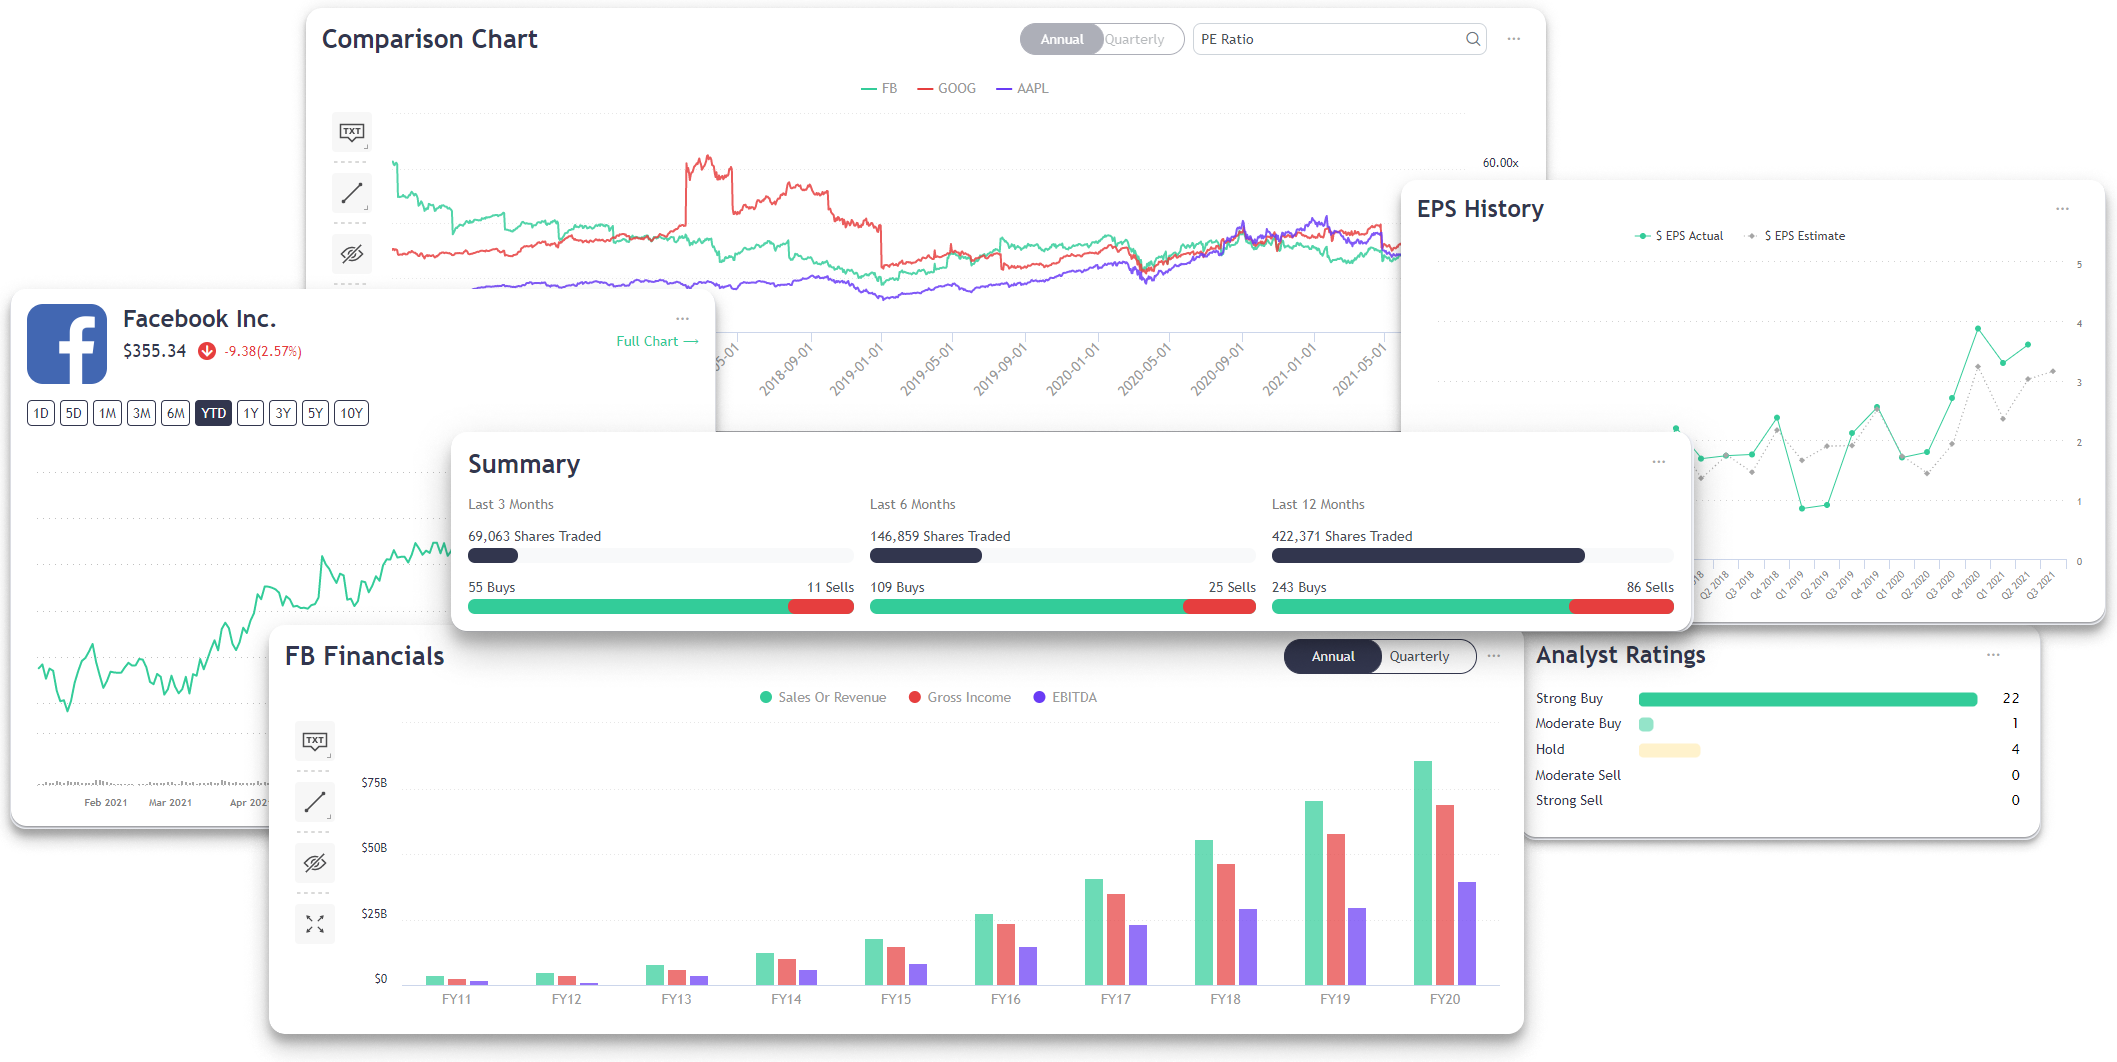 Pictures of INVRS' many analysis tools, including comparison charts, insider data, earnings history, analyst ratings, financial charts, and price charts